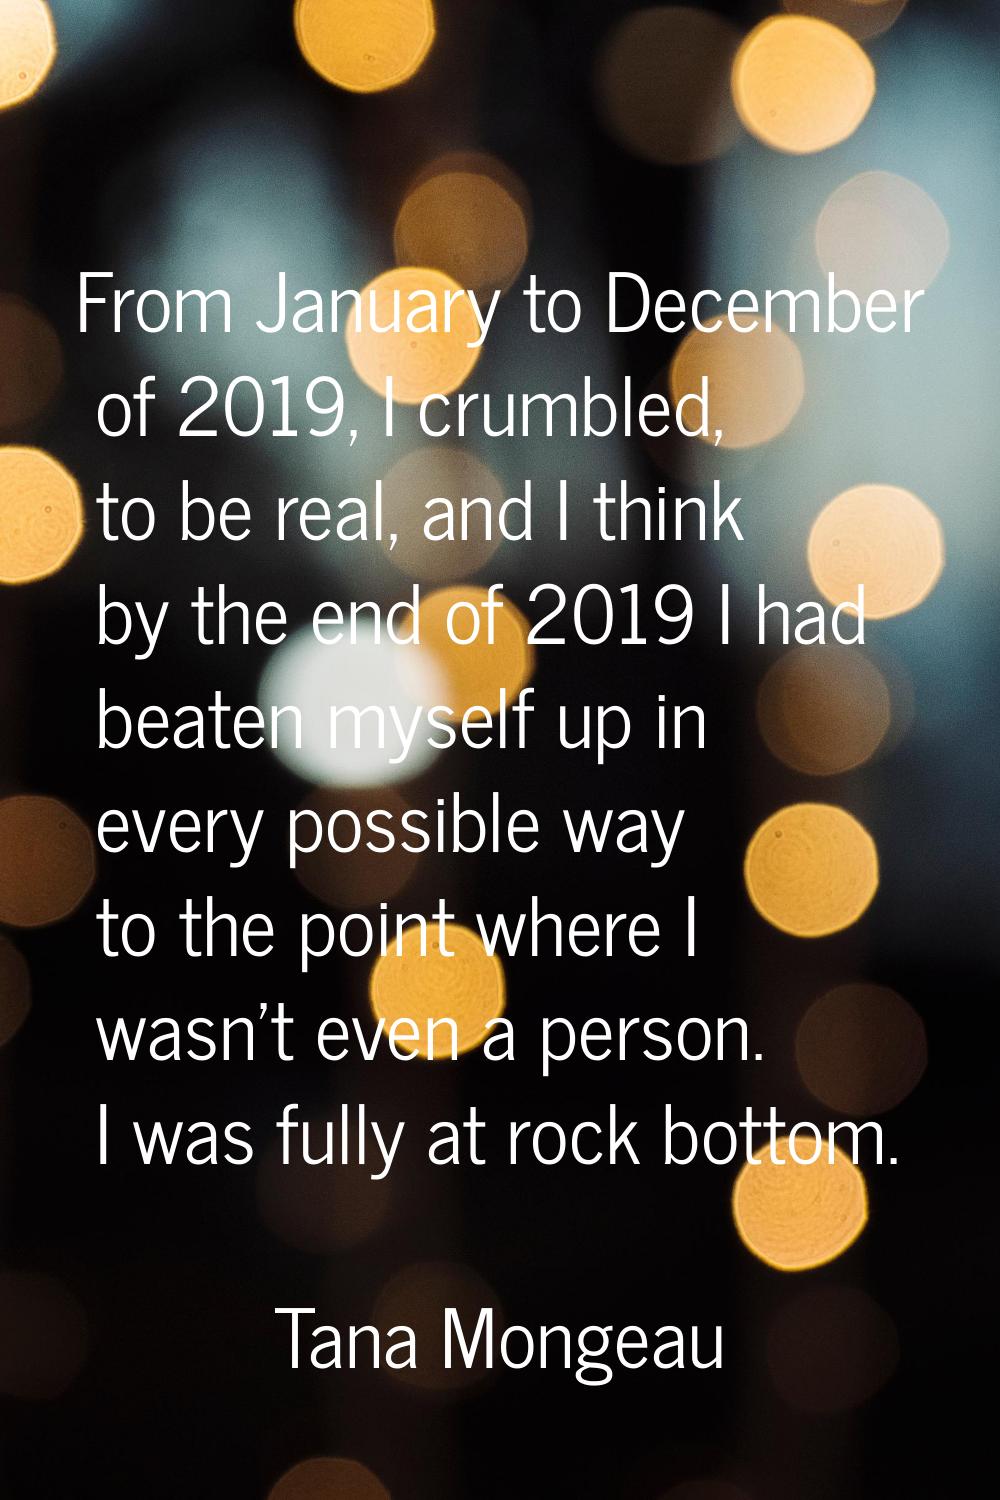 From January to December of 2019, I crumbled, to be real, and I think by the end of 2019 I had beat